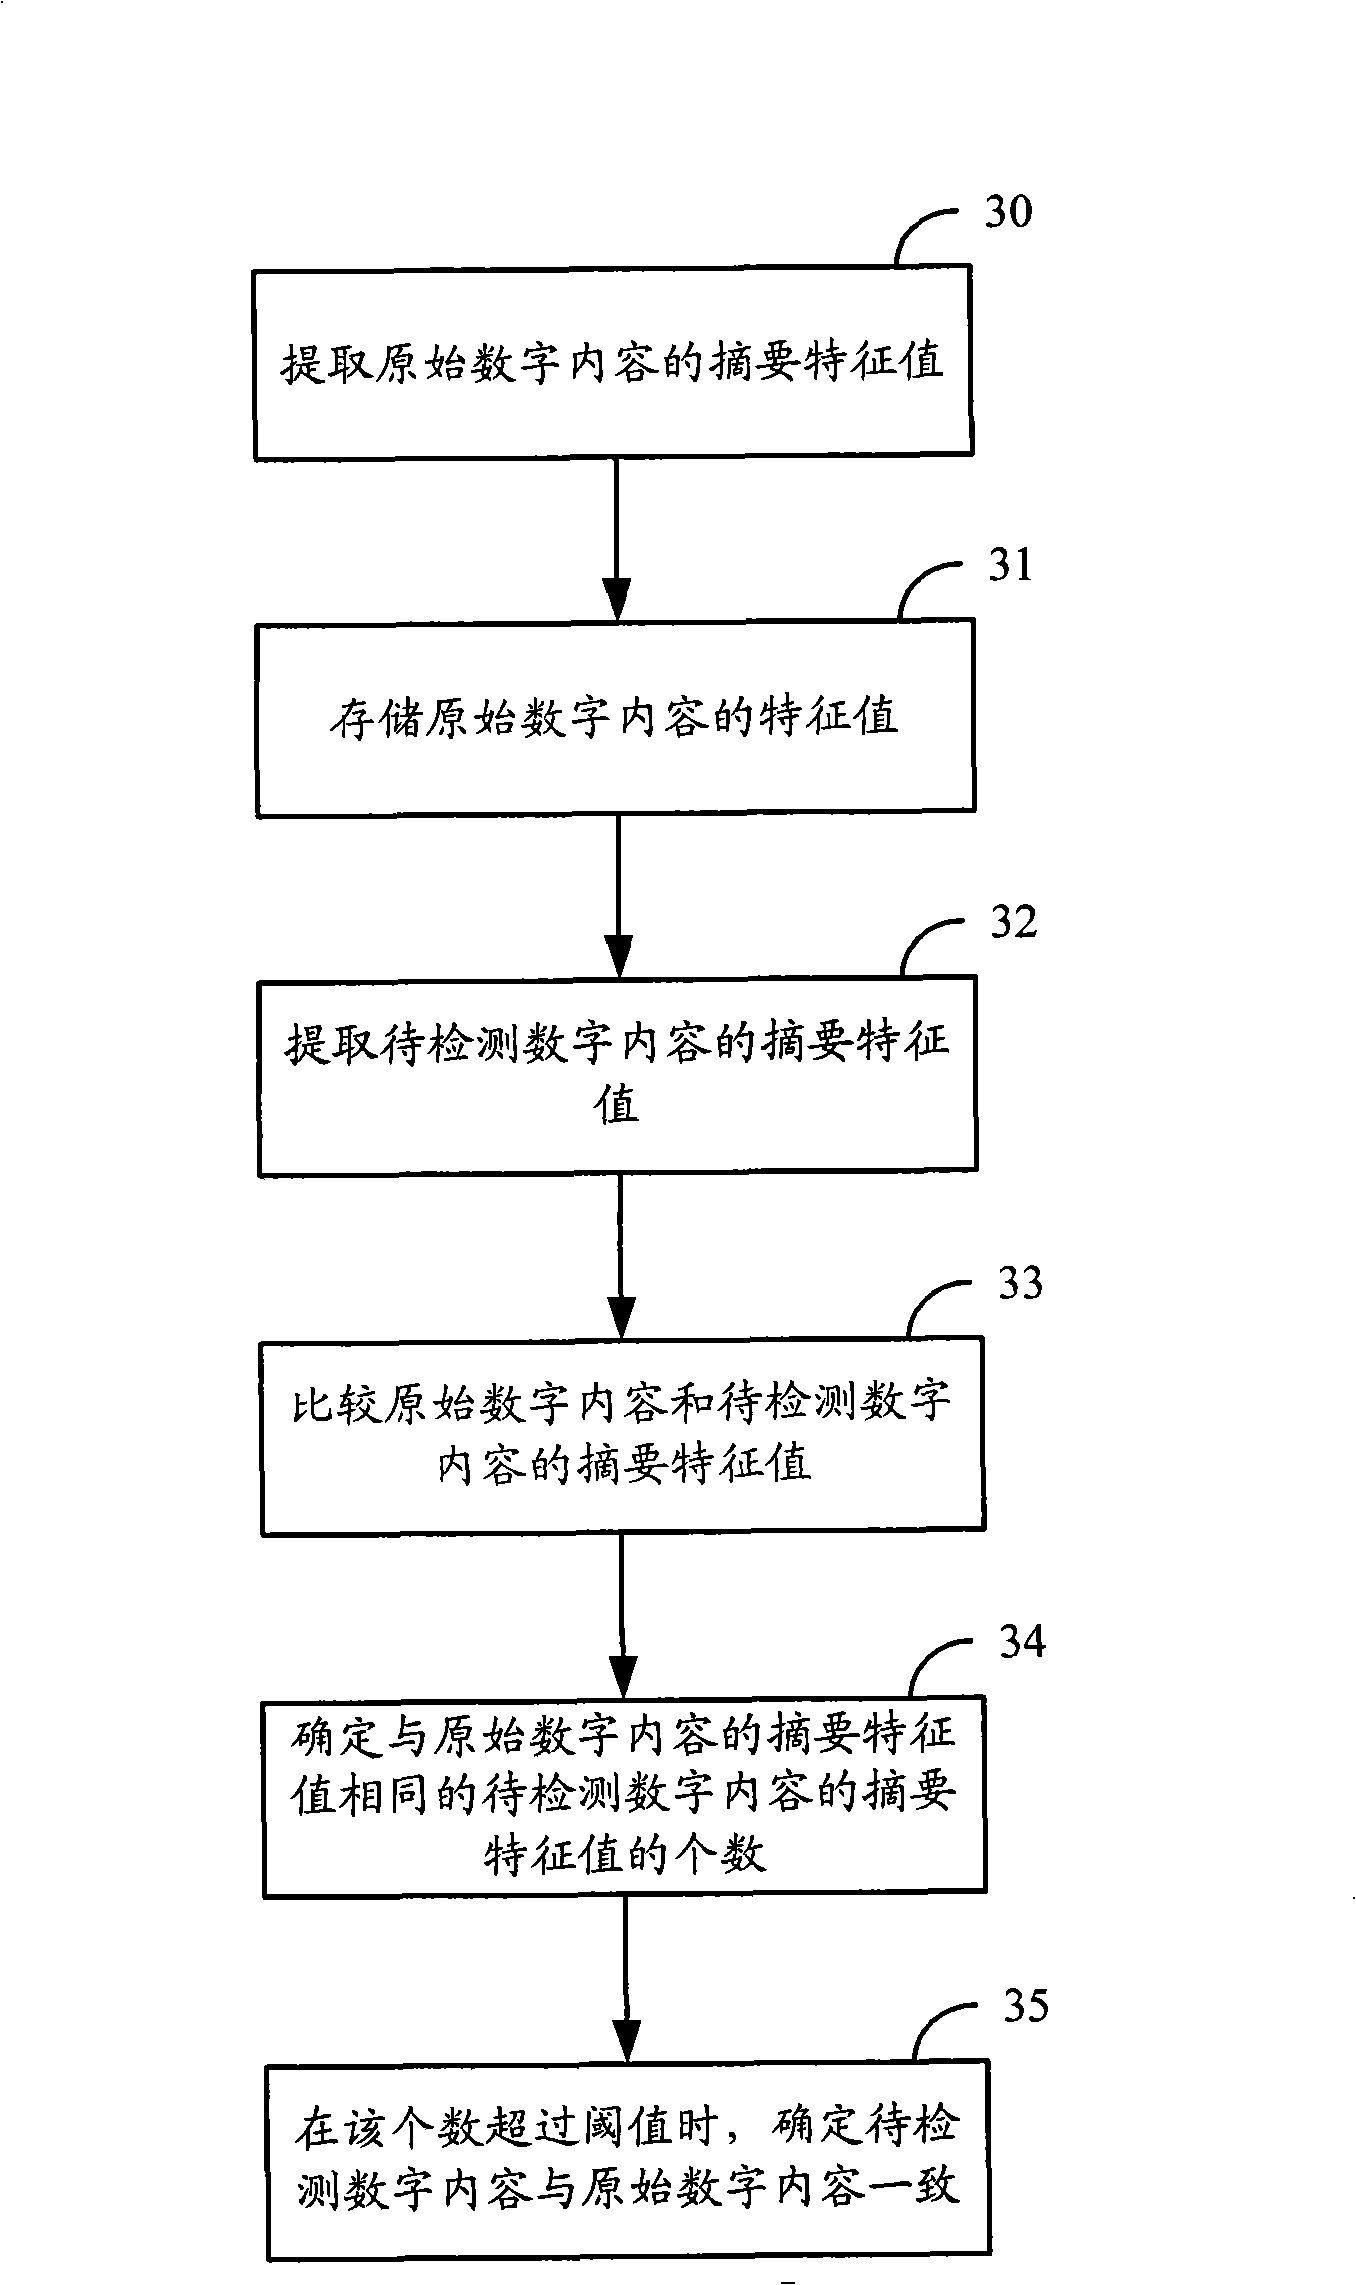 Method and apparatus for detecting consistency of digital content